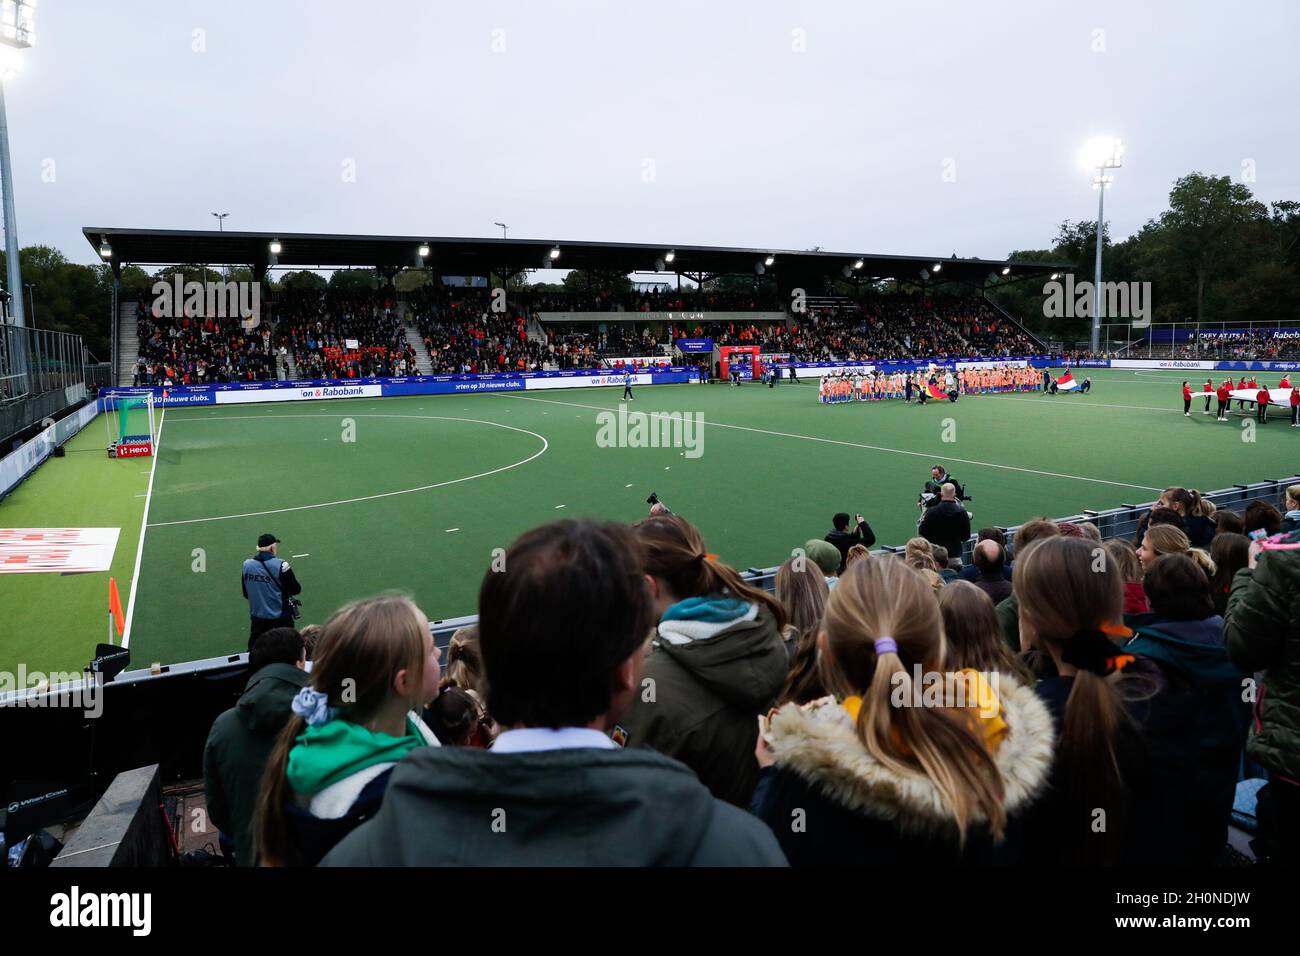 AMSTELVEEN, NETHERLANDS - OCTOBER 13: General overview of the Wagener Stadium with audience during the FIGH Pro League match between Netherlands and Belgium at Wagener Stadion on October 13, 2021 in Amstelveen, Netherlands (Photo by Peter Lous/Orange Pictures) Stock Photo